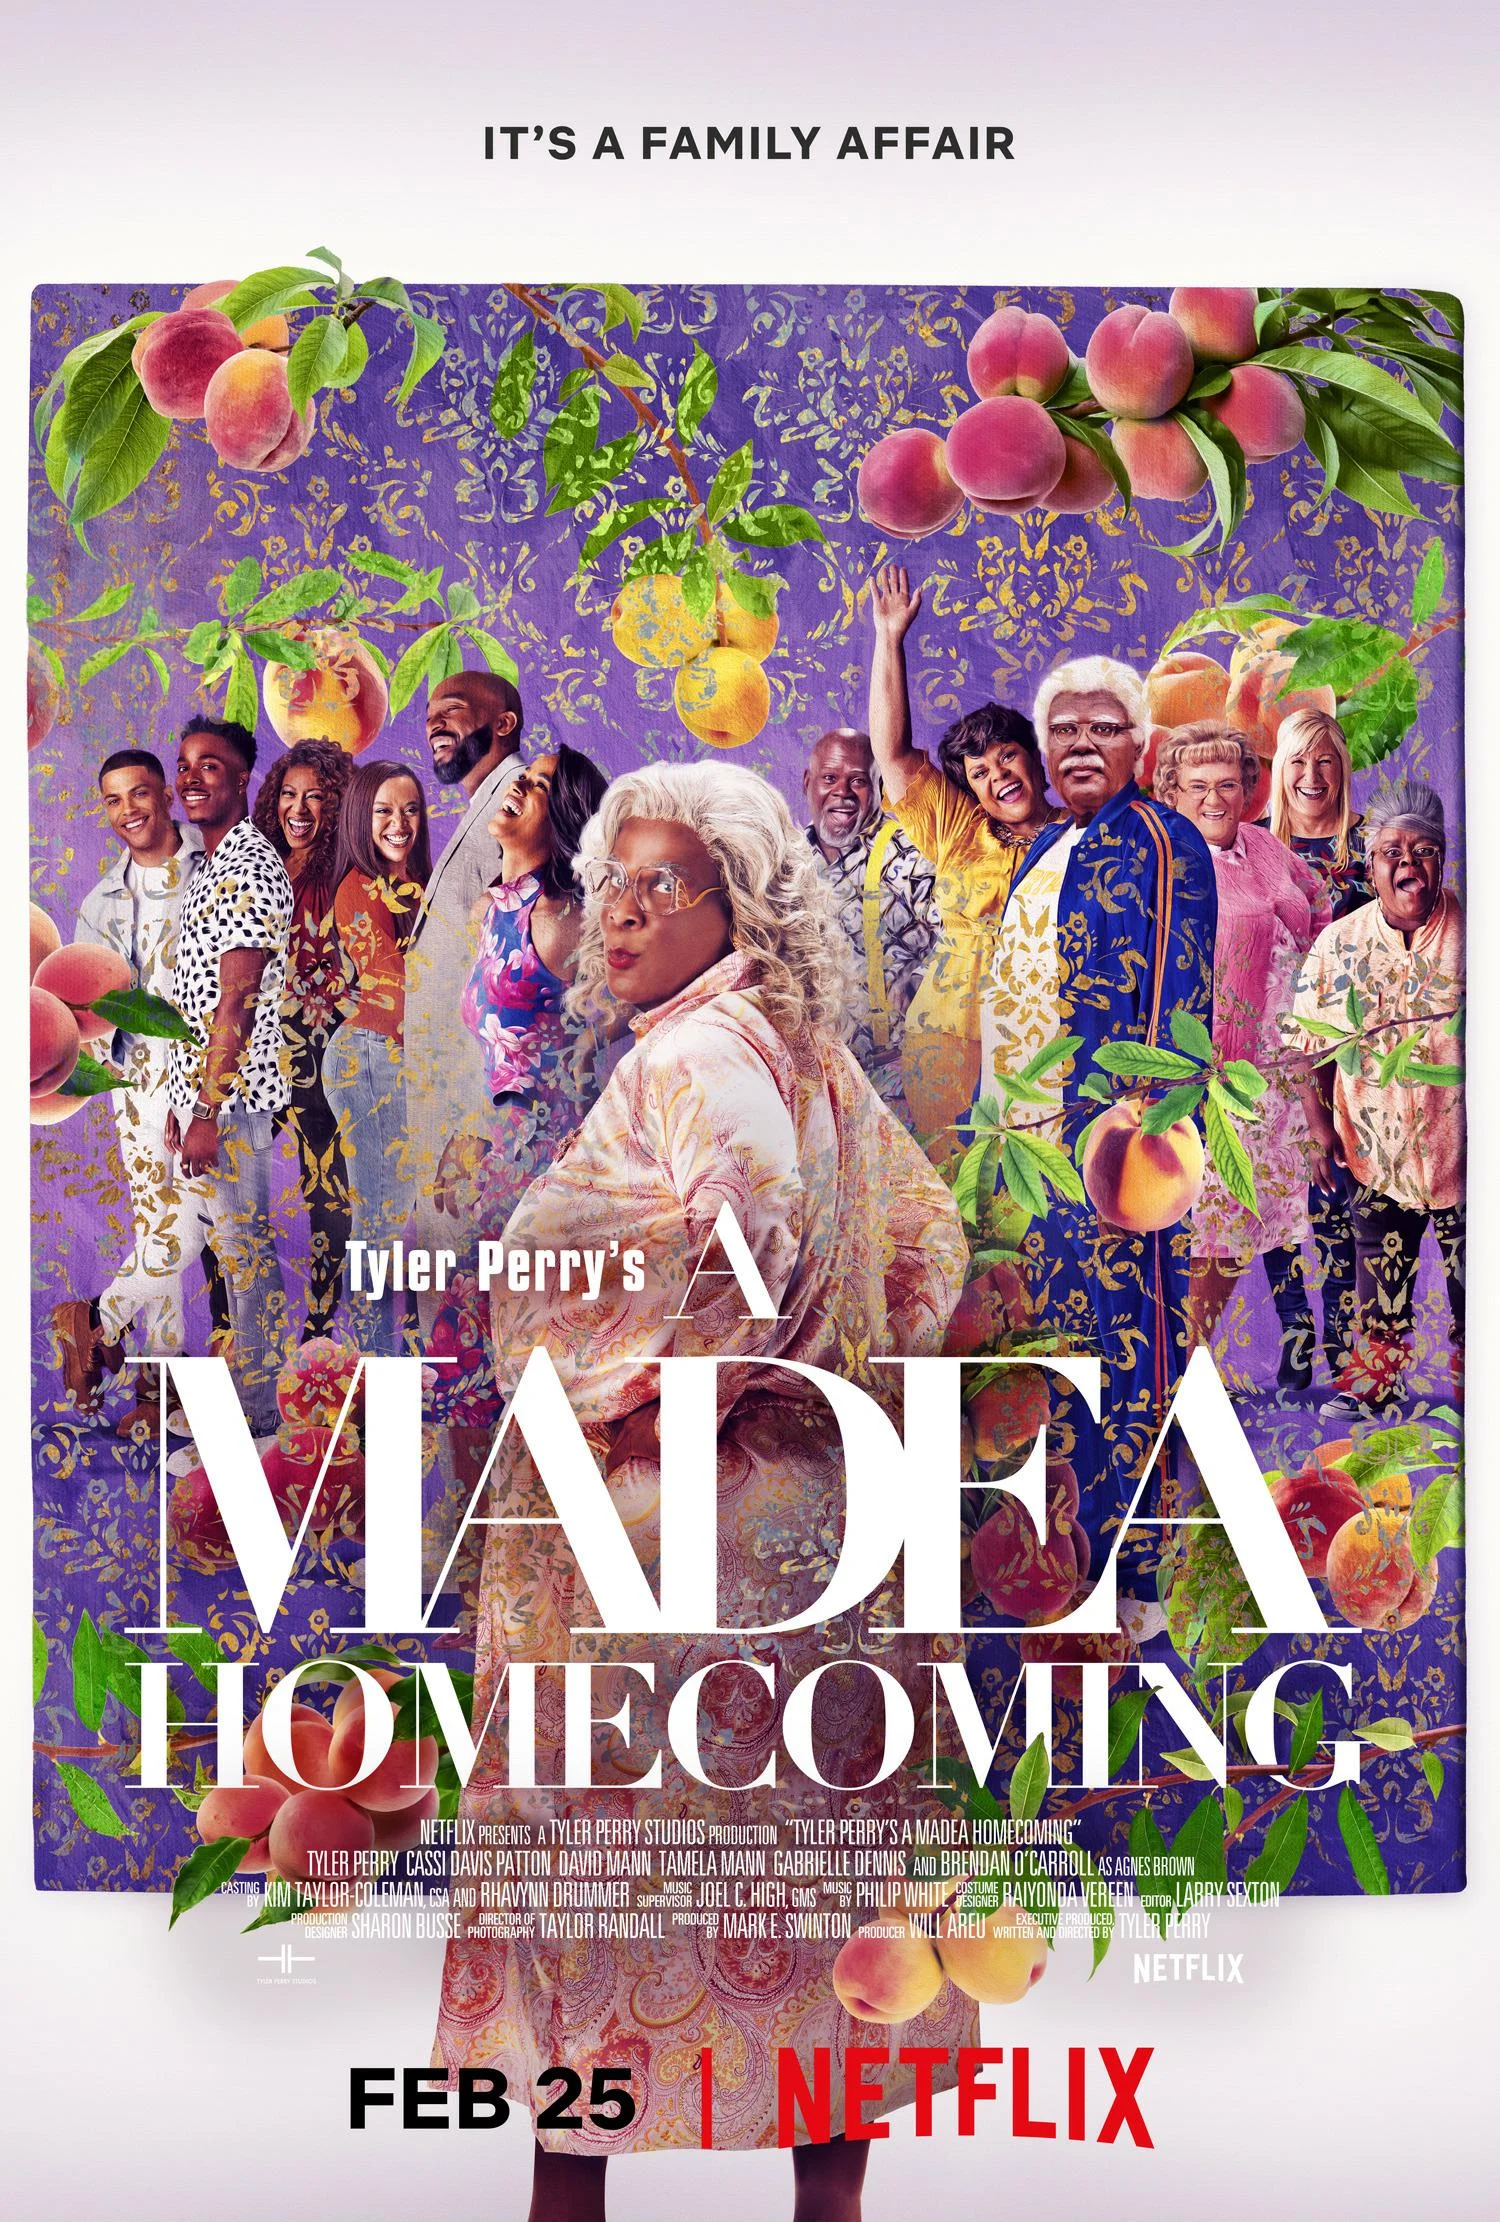 "Tyler Perry's A Madea Homecoming" airborne top of the Netflix Movie Time Watch List!